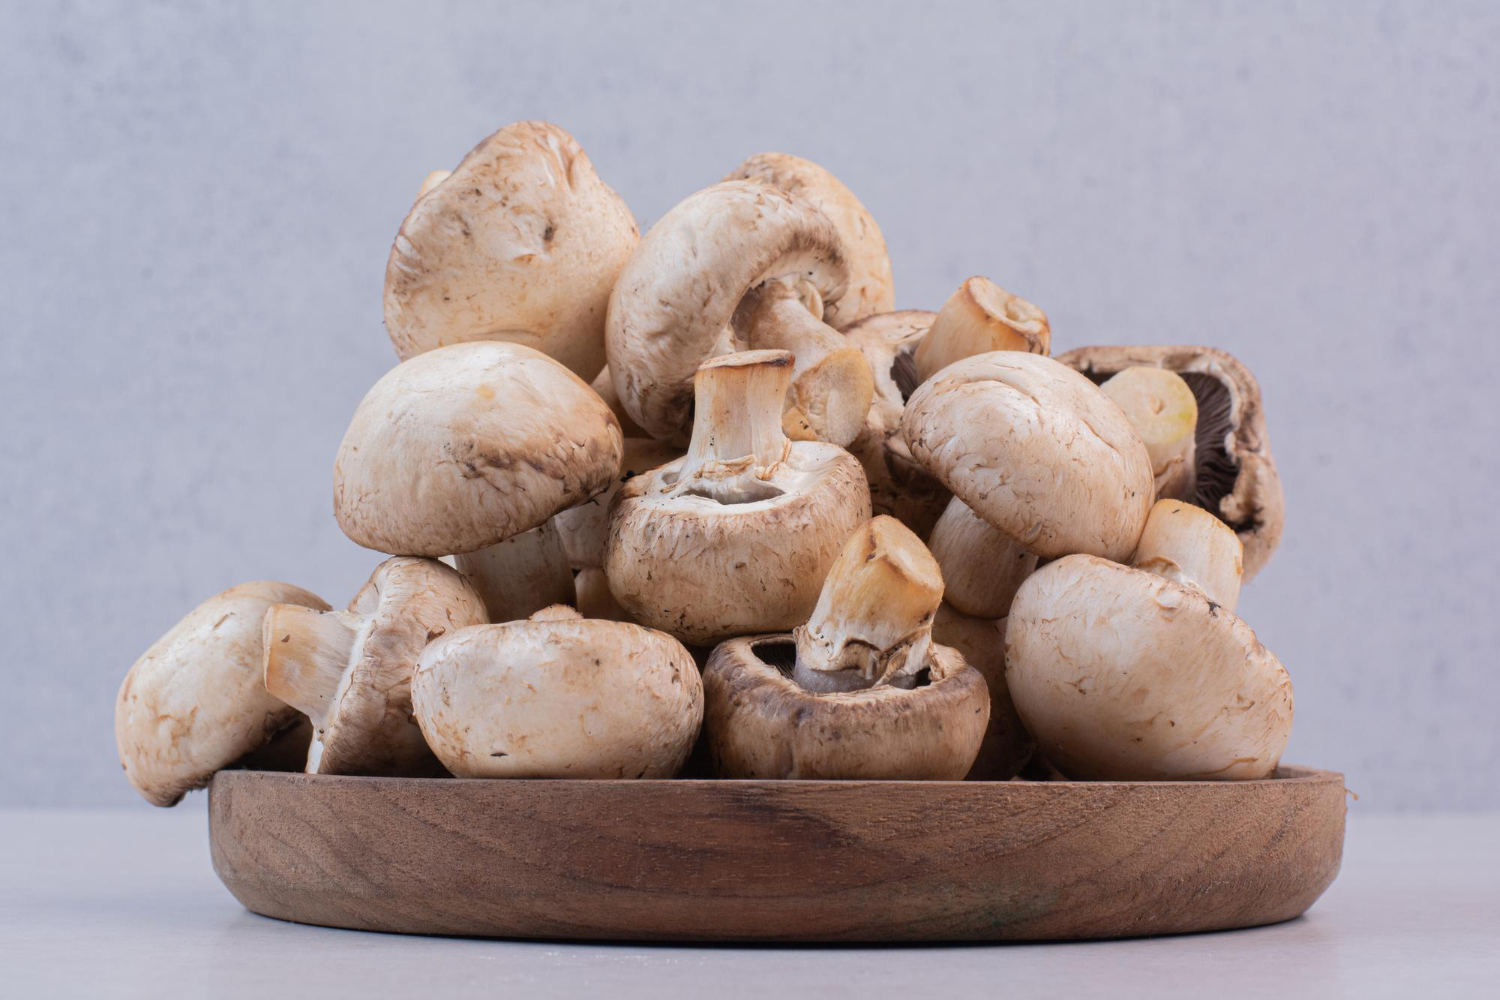 Mushrooms: Nutritional Delicacies with Health Benefits and Cautions